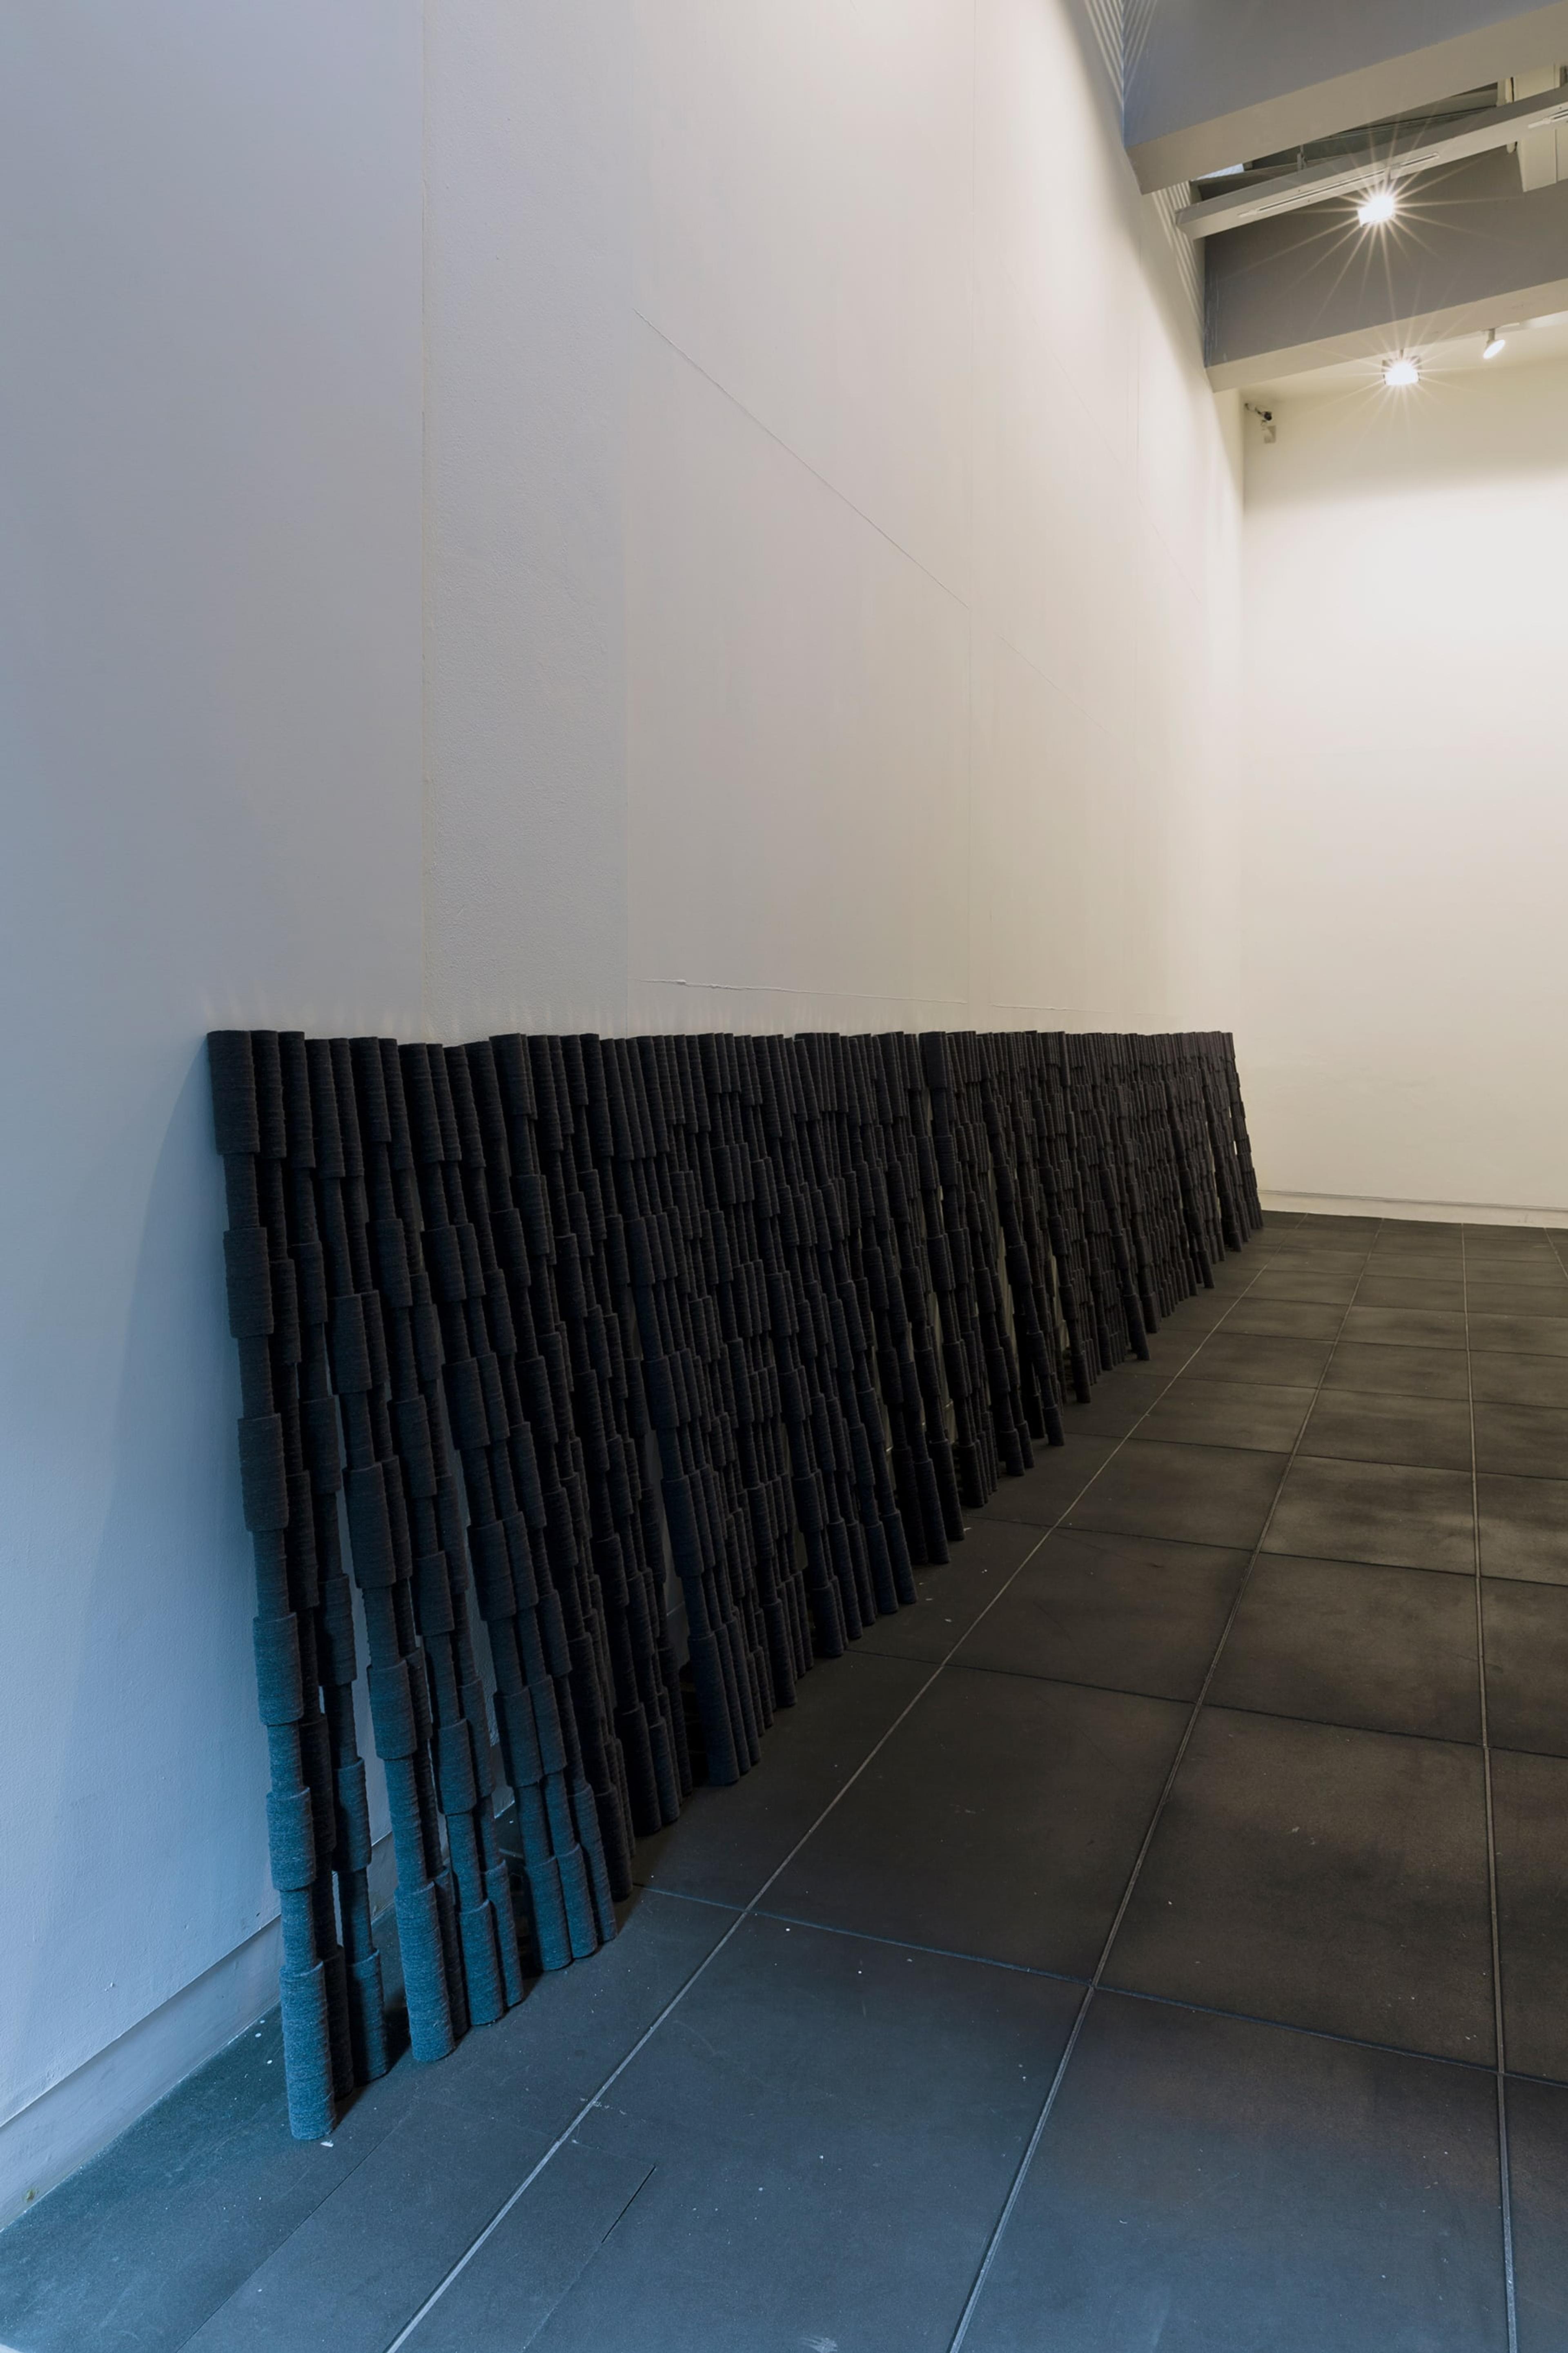 Installation view of Peter Robinson, Cuts and Junctures, 2013, cut wool felt, aluminum, installation dimensions variable, at the Adam Art Gallery. Courtesy the artist and Peter McLeavey Gallery, Wellington. Photo: Shaun Waugh.